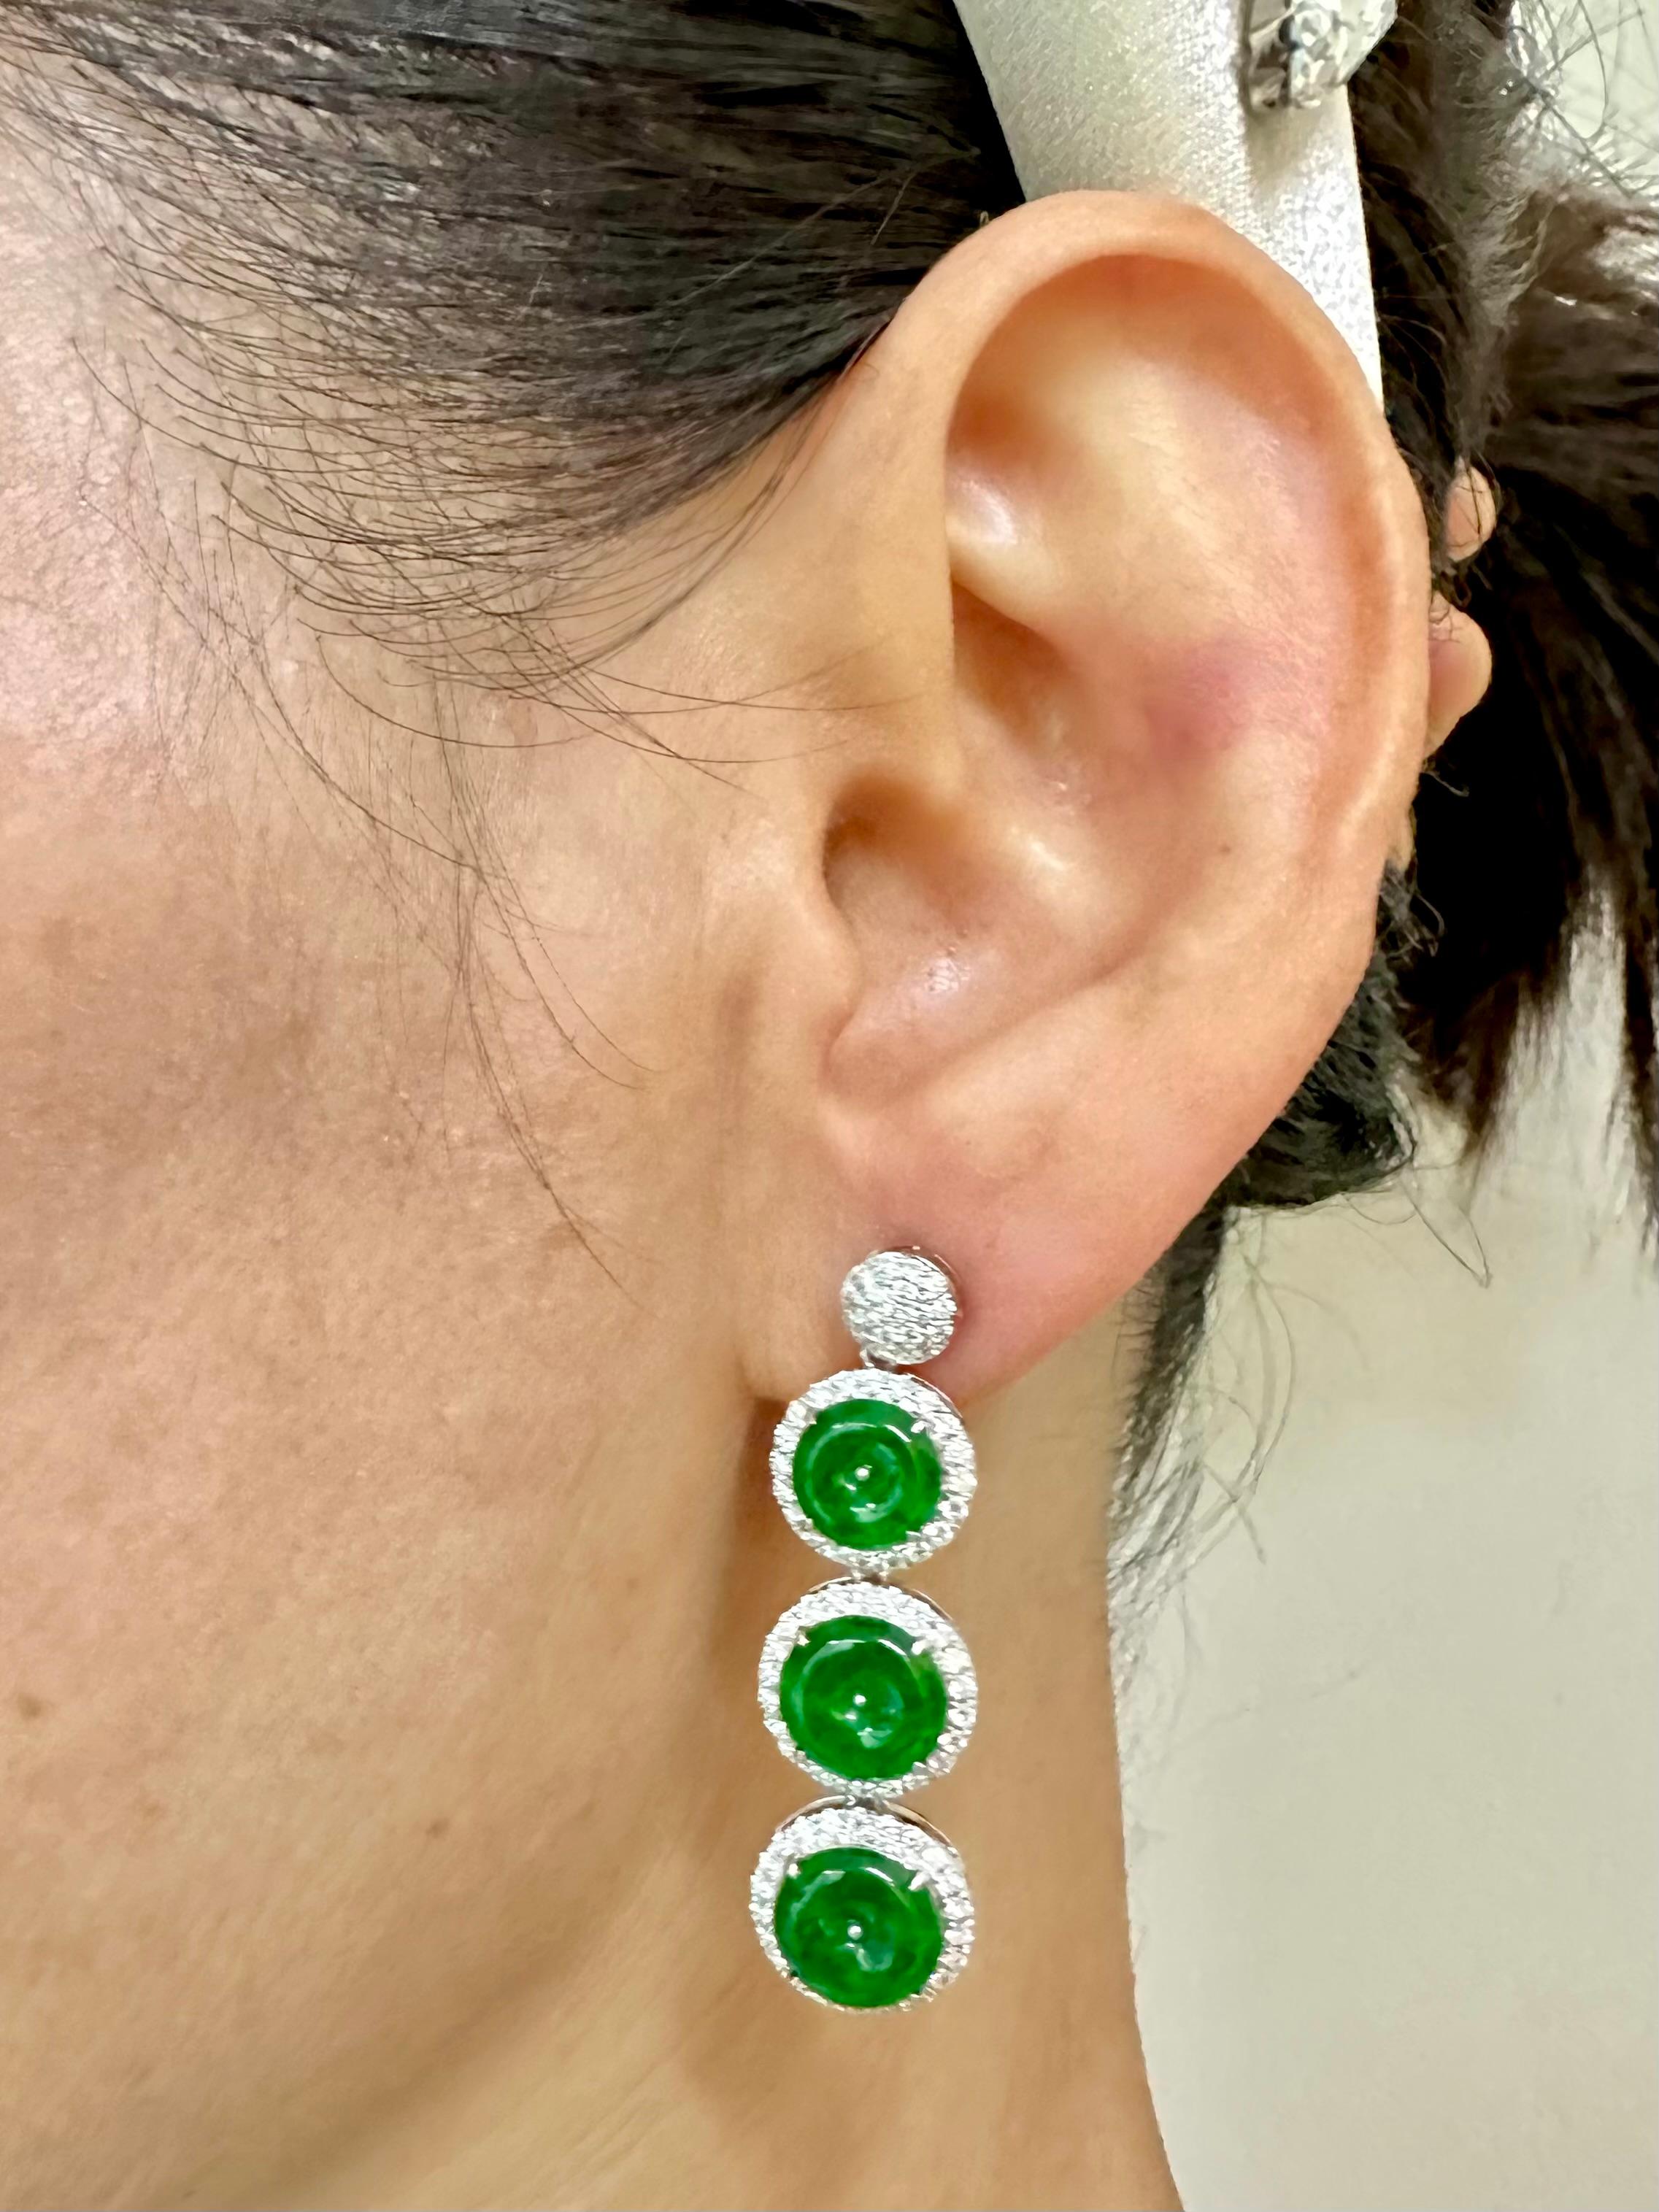 Please check out the HD video! Here is a special pair of spinach green Jade drop earrings. The diameter of the 3 jade donut sections from top to bottom are about 10.58mm, 11.41mm and 11.81mm respectively. The earrings are set in 18k white gold and